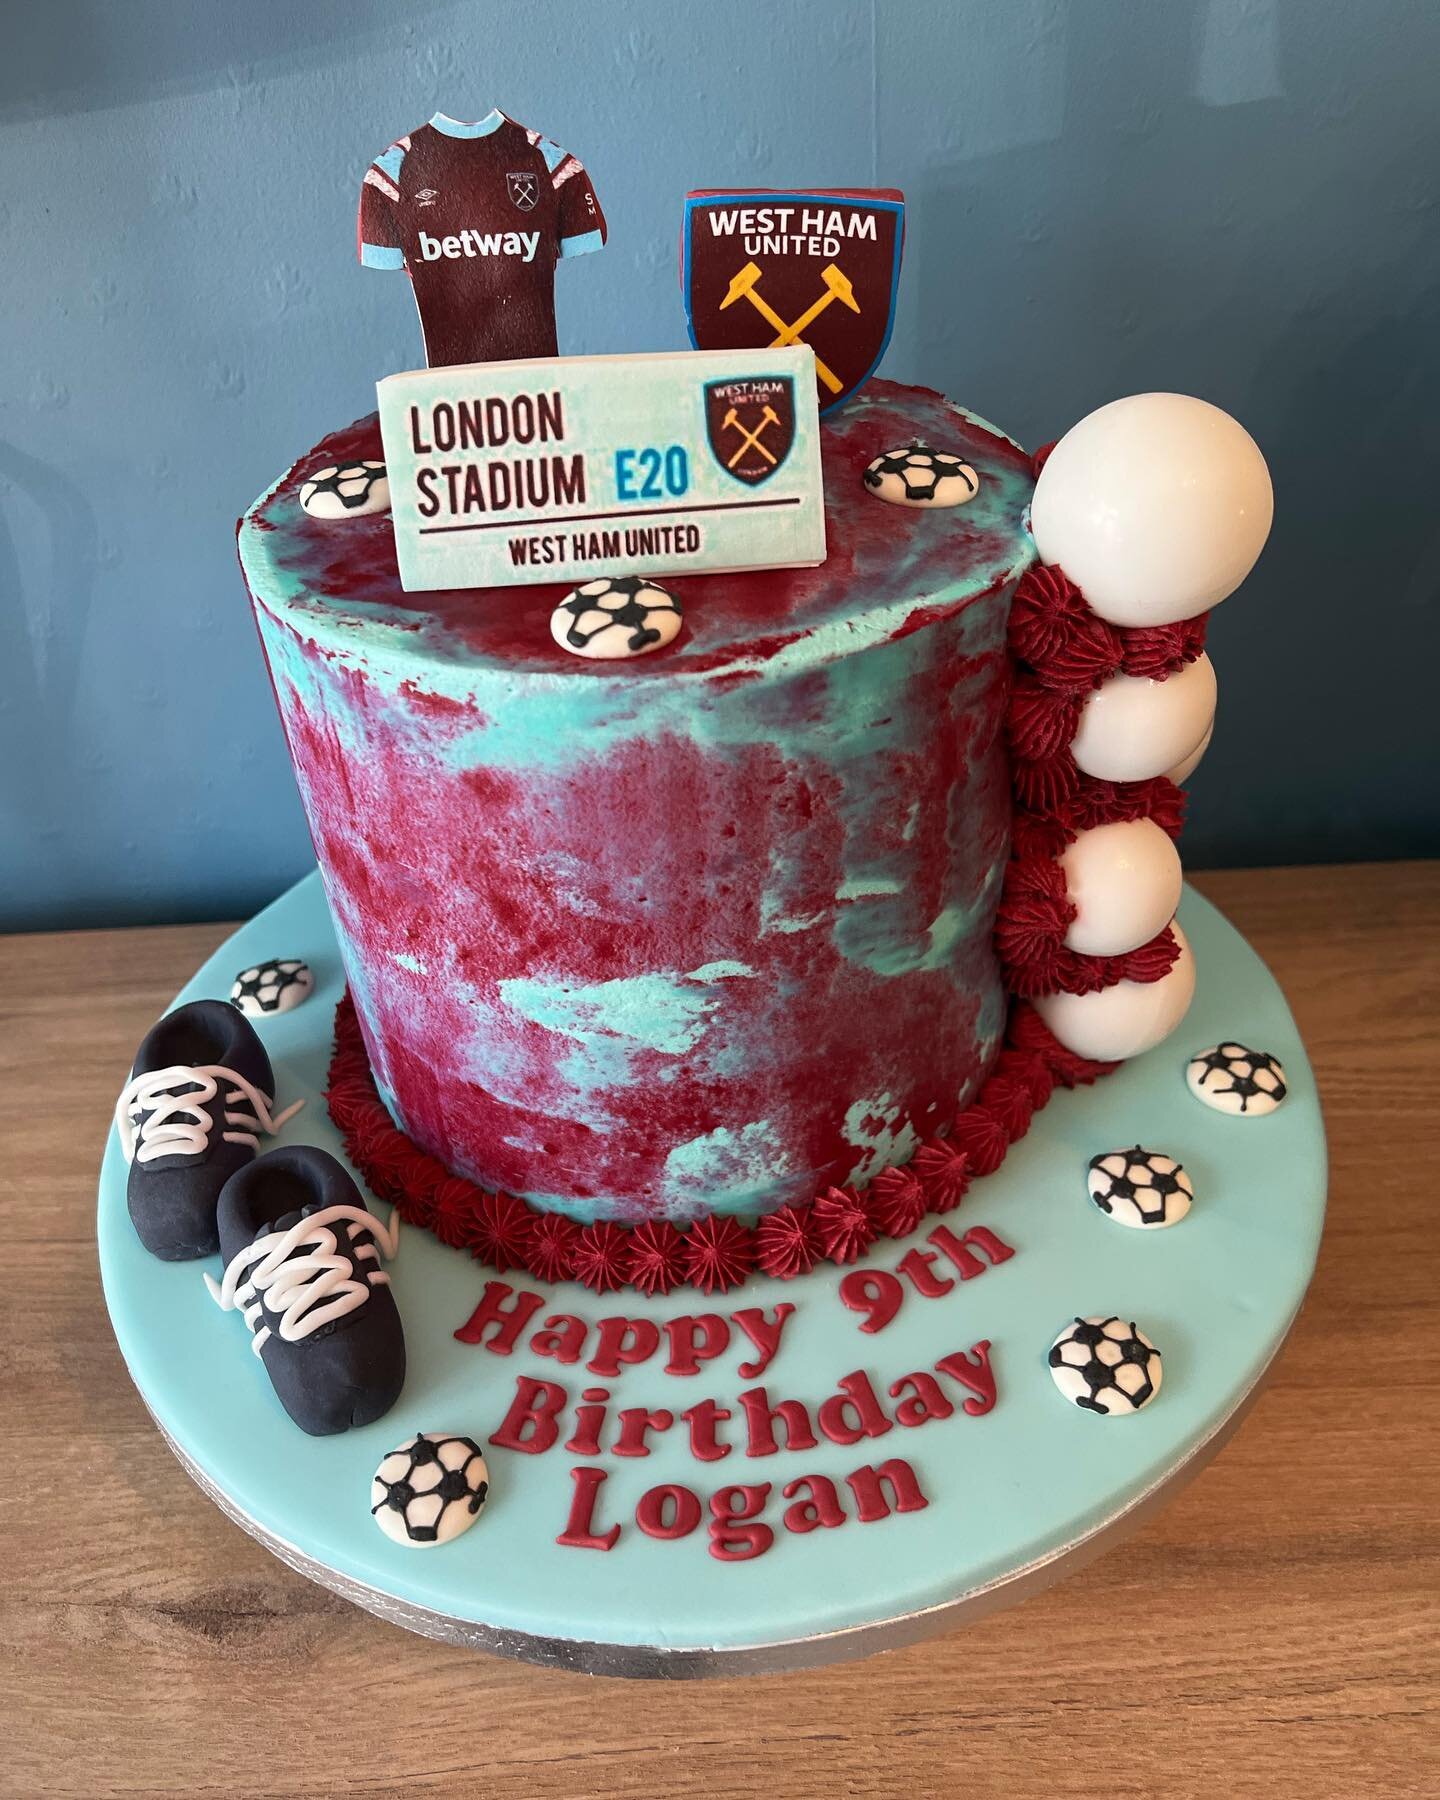 Logan had a West Ham themed cake and cup cakes for his 9th birthday.  Hope you had a great day. X